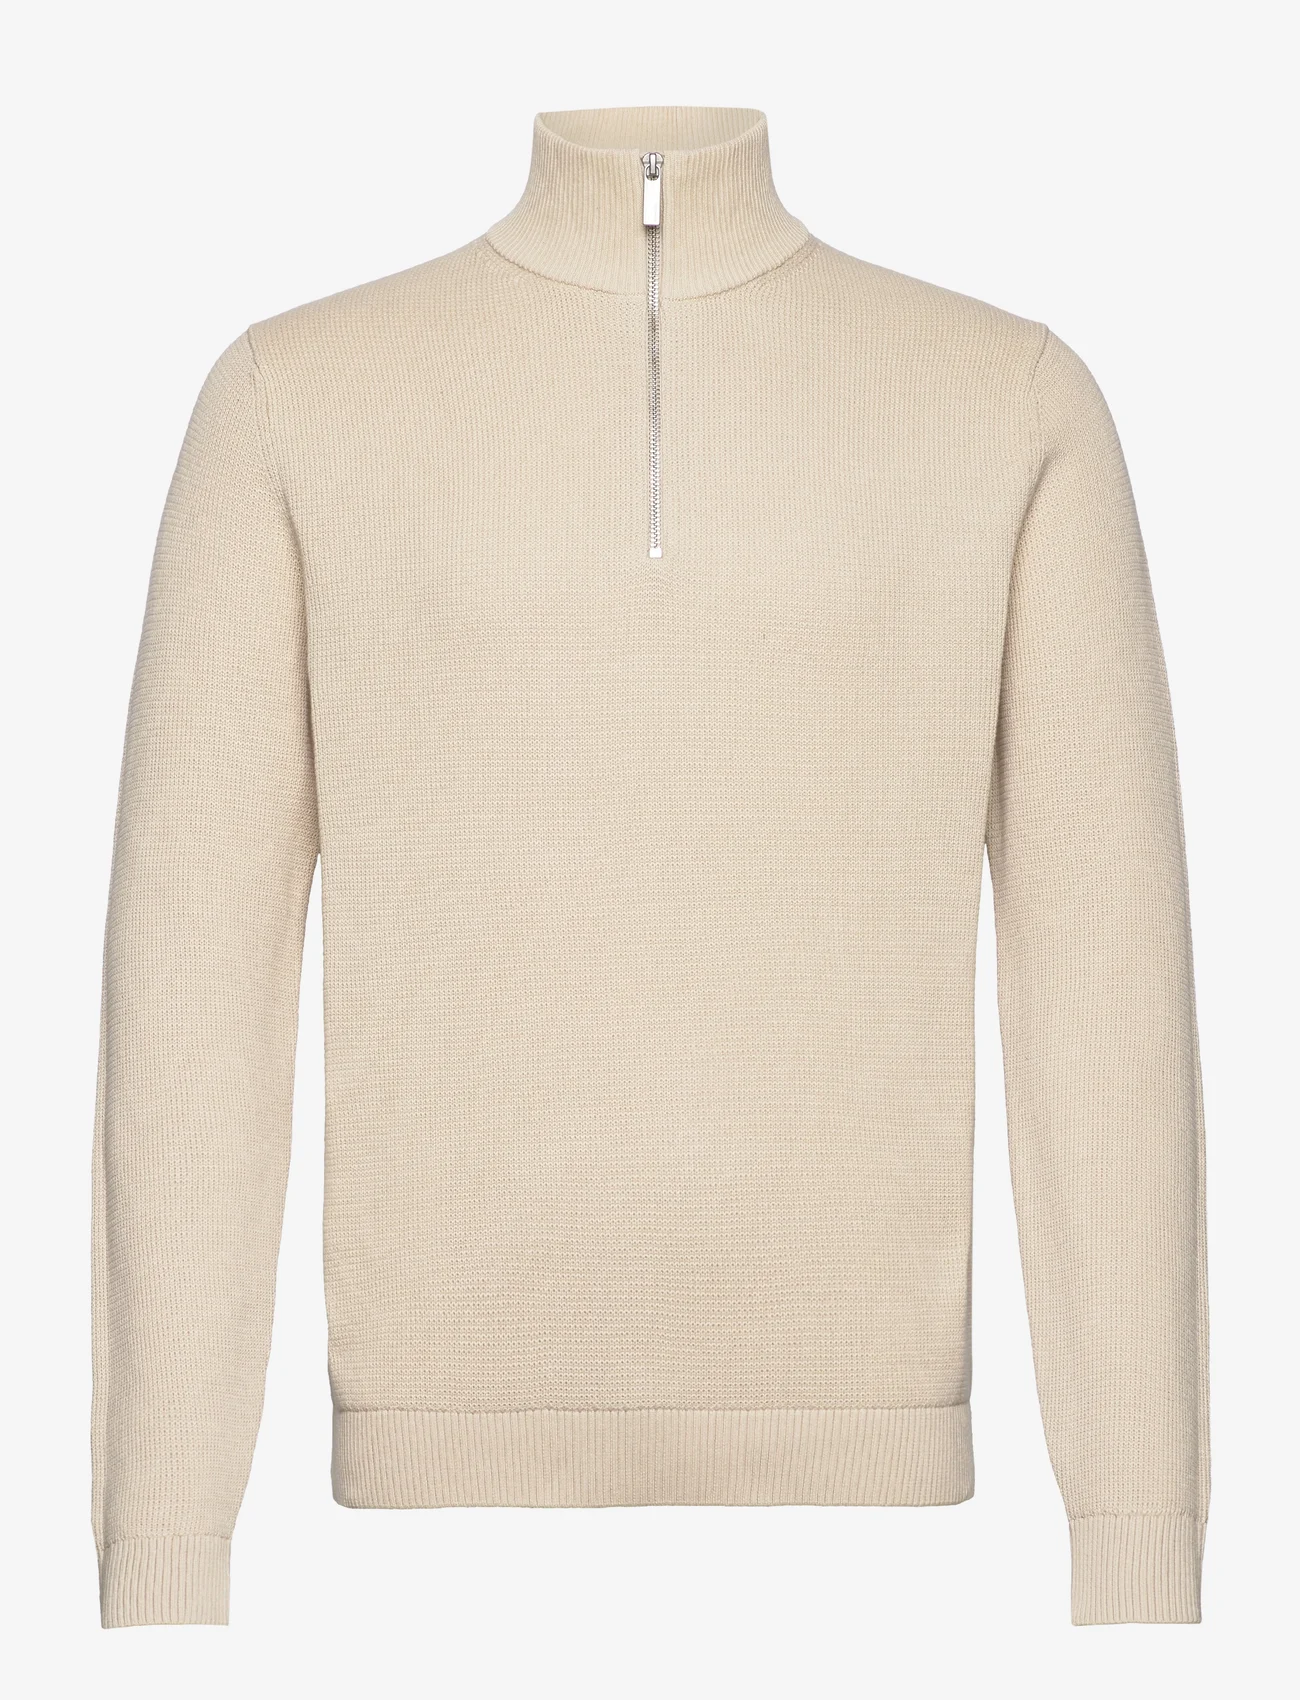 Selected Homme - SLHDANE LS KNIT STRUCTURE HALF ZIP NOOS - mænd - oatmeal - 0